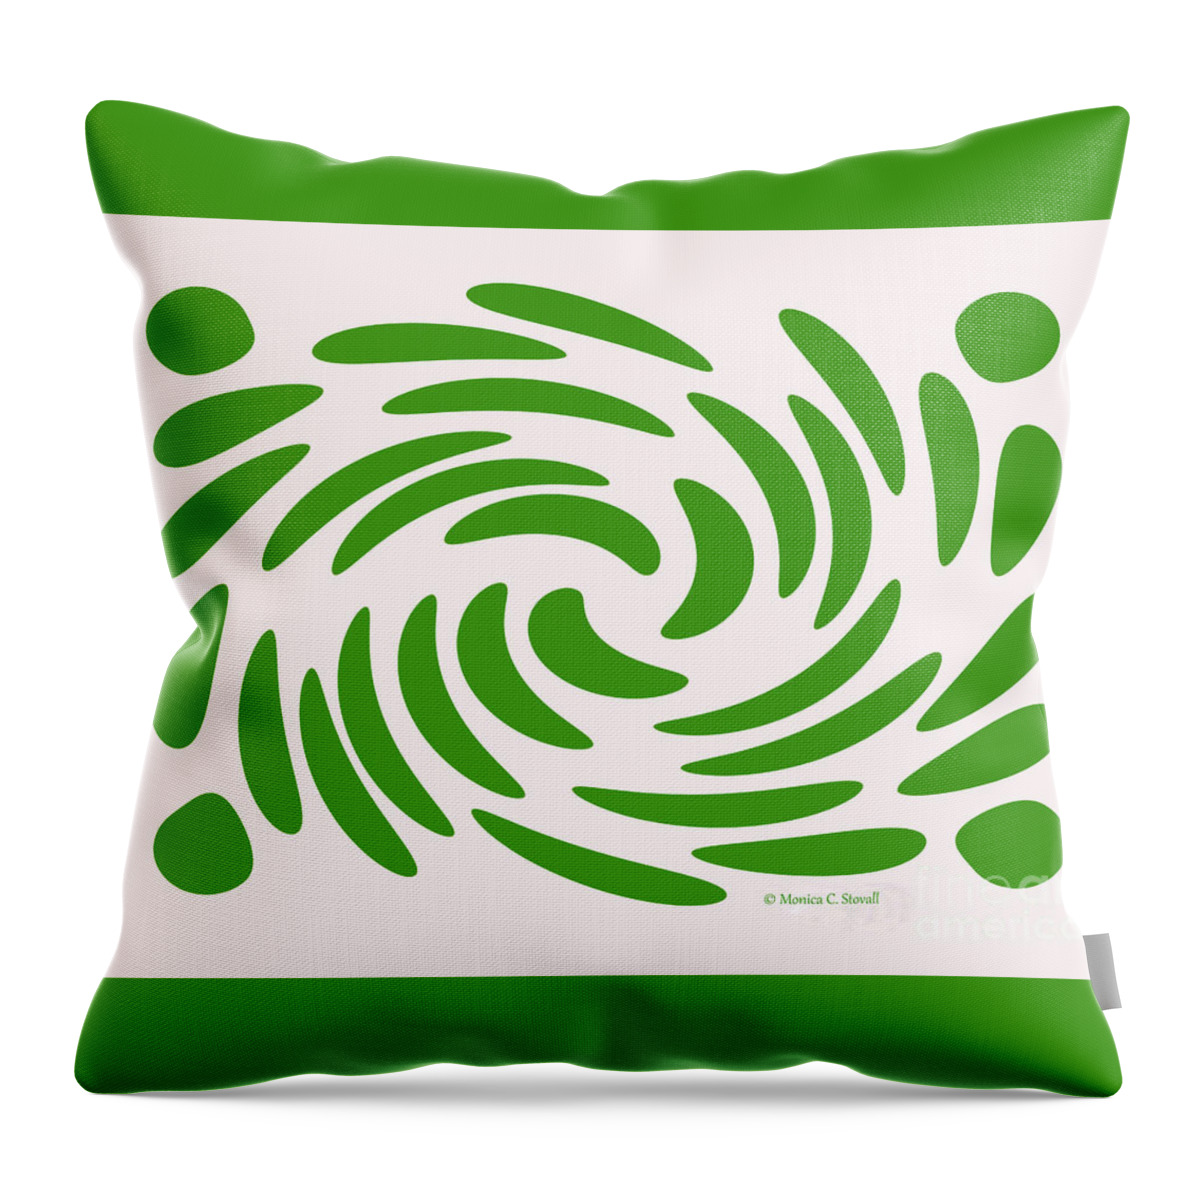 Graphic Design Throw Pillow featuring the digital art Swirls N Dots S1 by Monica C Stovall